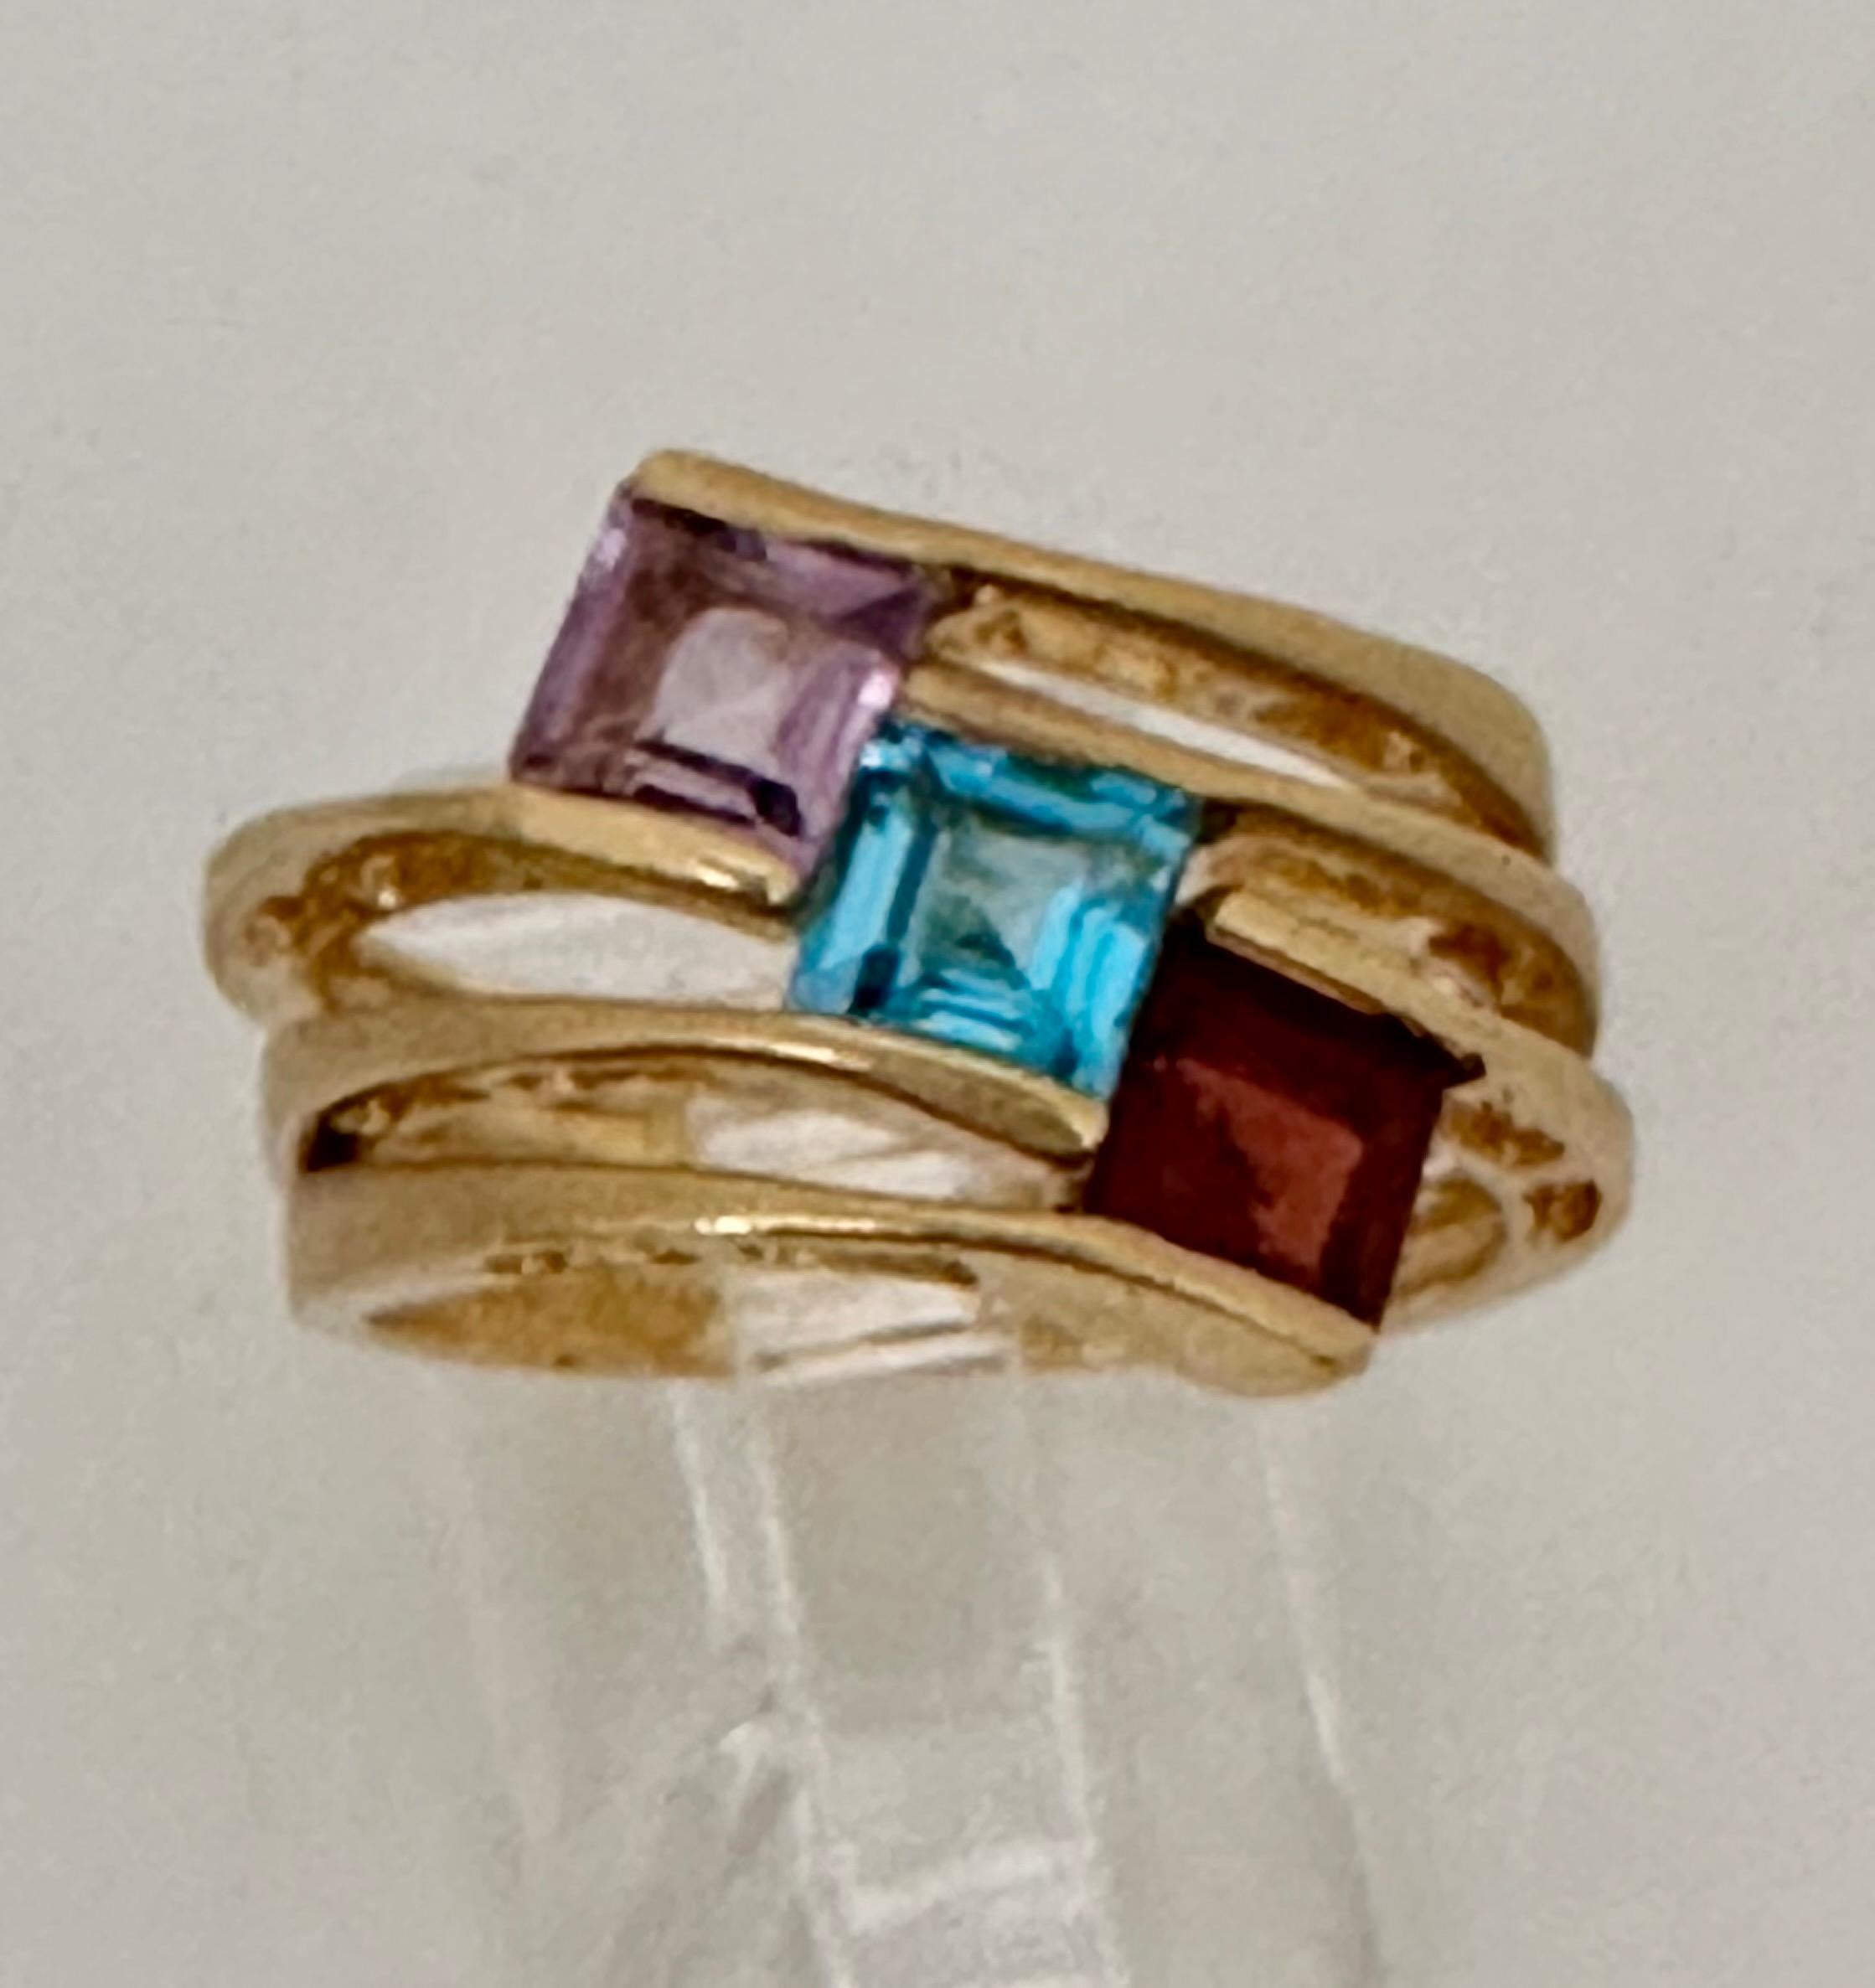 14kt Yellow Gold 5mm Square Cut Garnet Amethyst and Blue Topaz 14mm Wide Band Ring Sz 7

Garnet:
The name garnet derives from the Latin word for grain due to the similarity between their rounded crystals and a pomegranate's seeds. Garnet is the